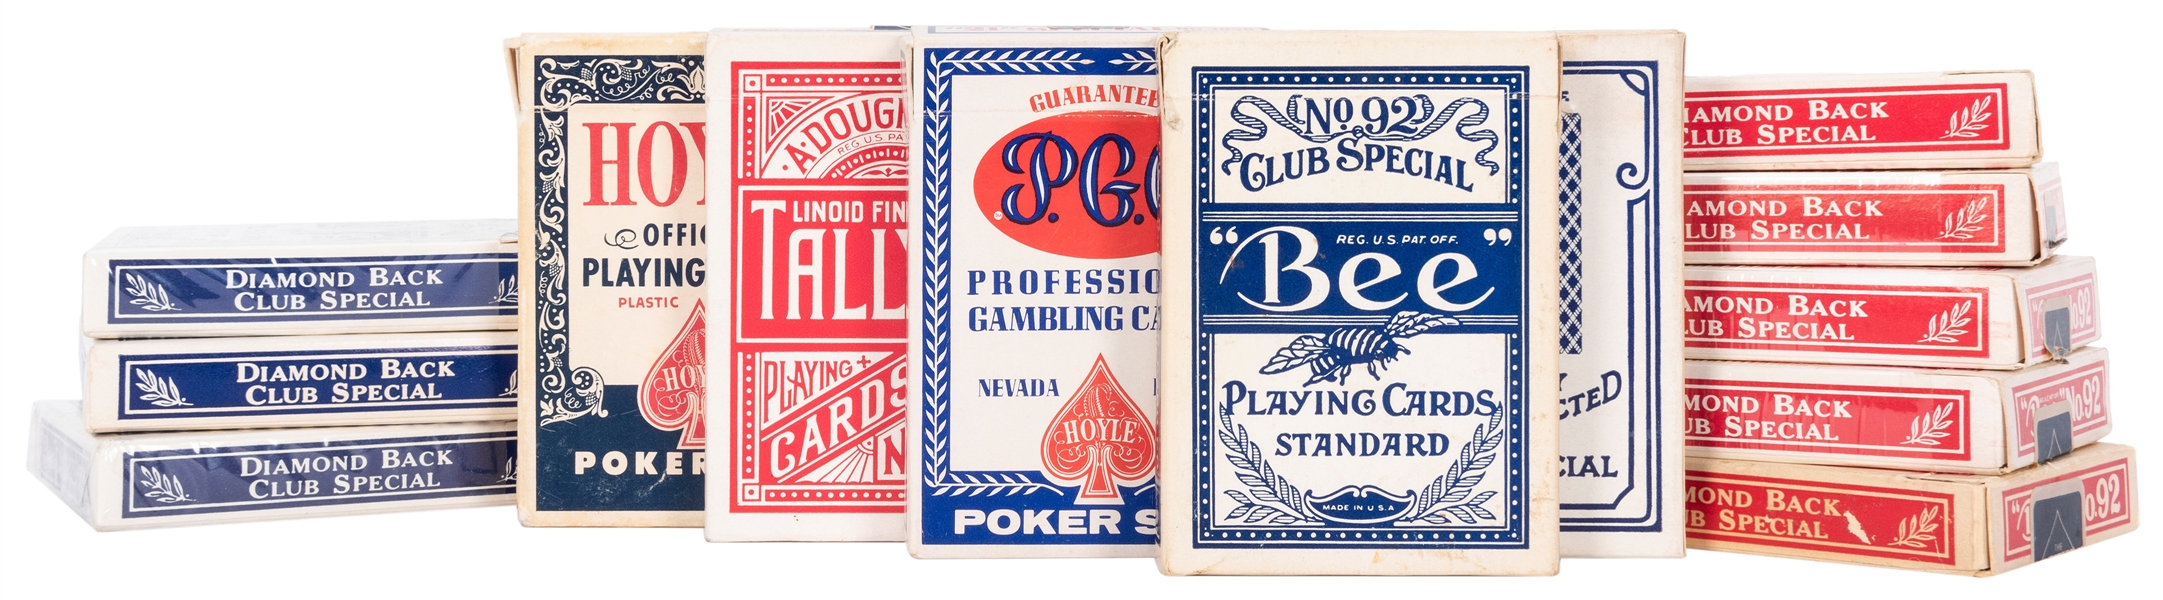  Scarne, John. Group of Playing Card Decks Owned by Scarne. ...